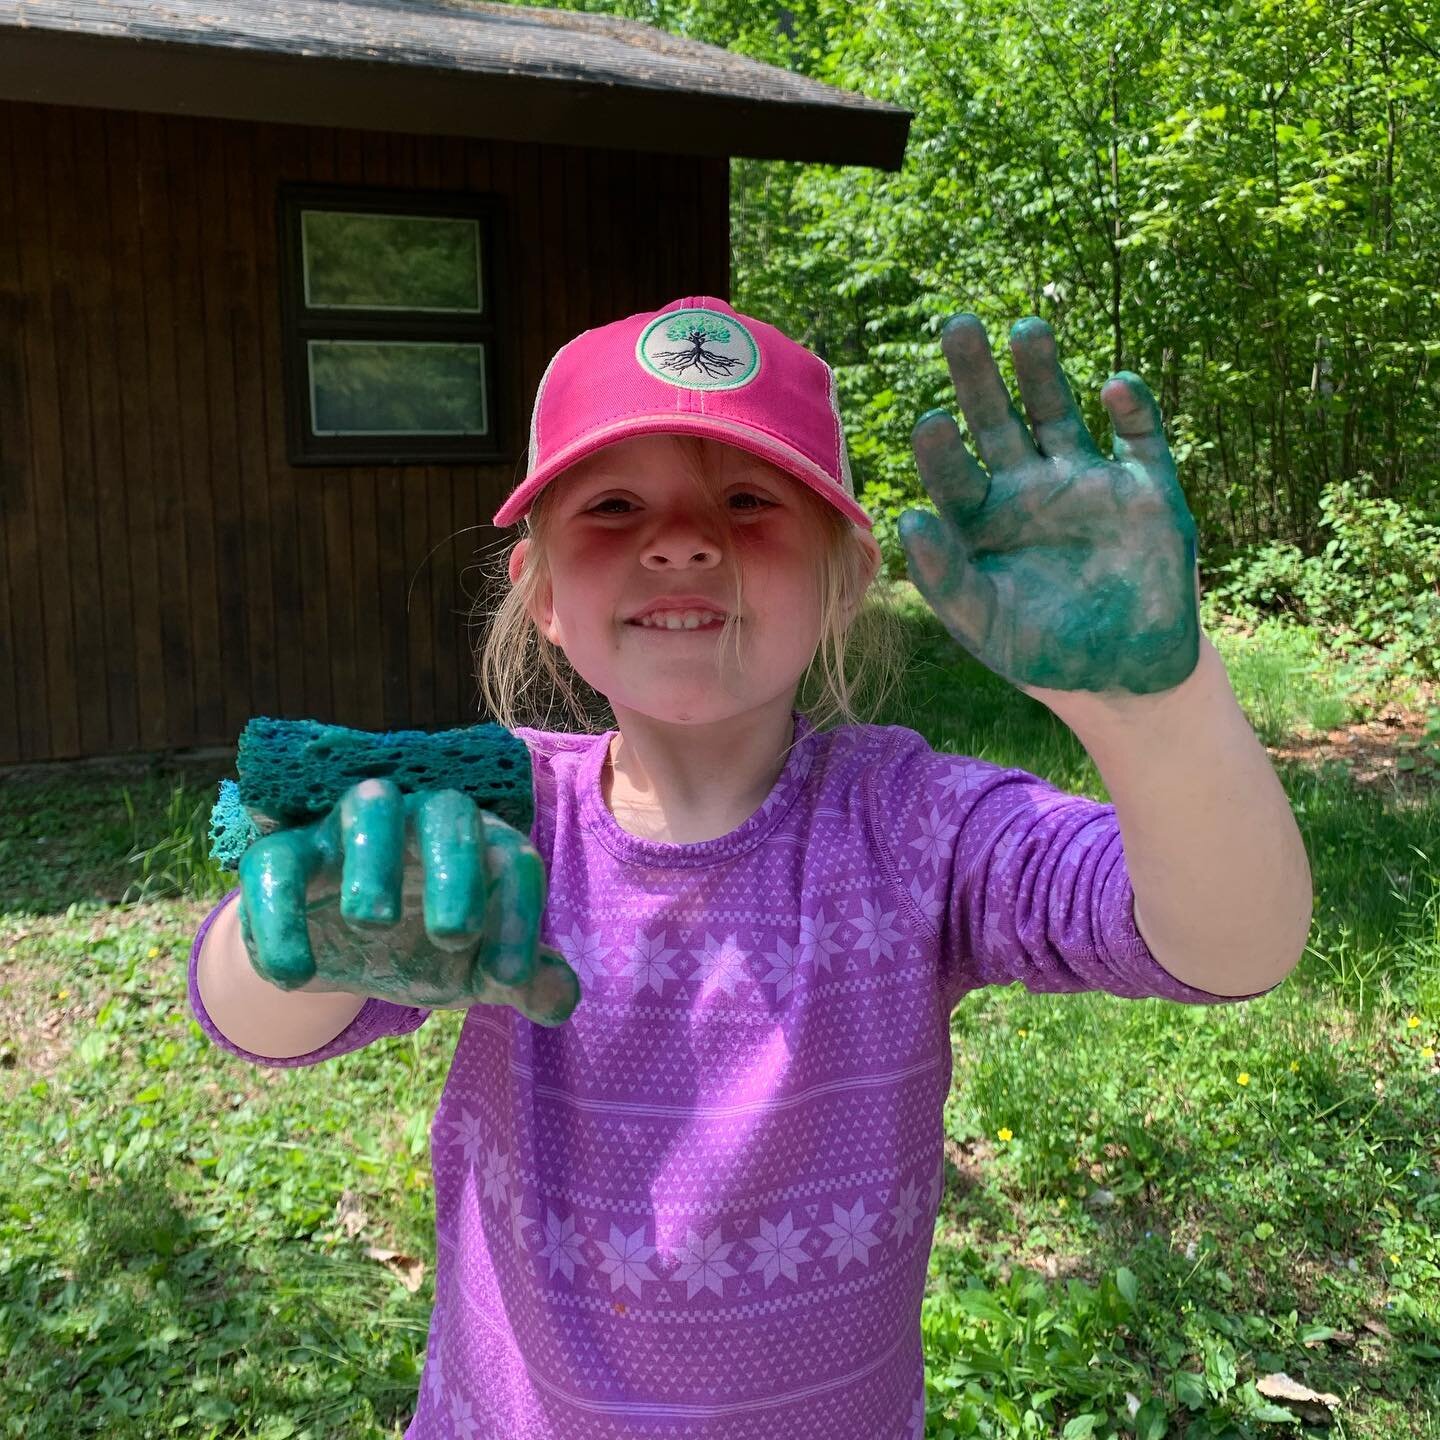 This morning at nature preschool we got to explore map-making! After spending the first part of our morning enjoying some chalk at the nature play space, we got to explore different art materials to aid us in making our own maps (along with some othe